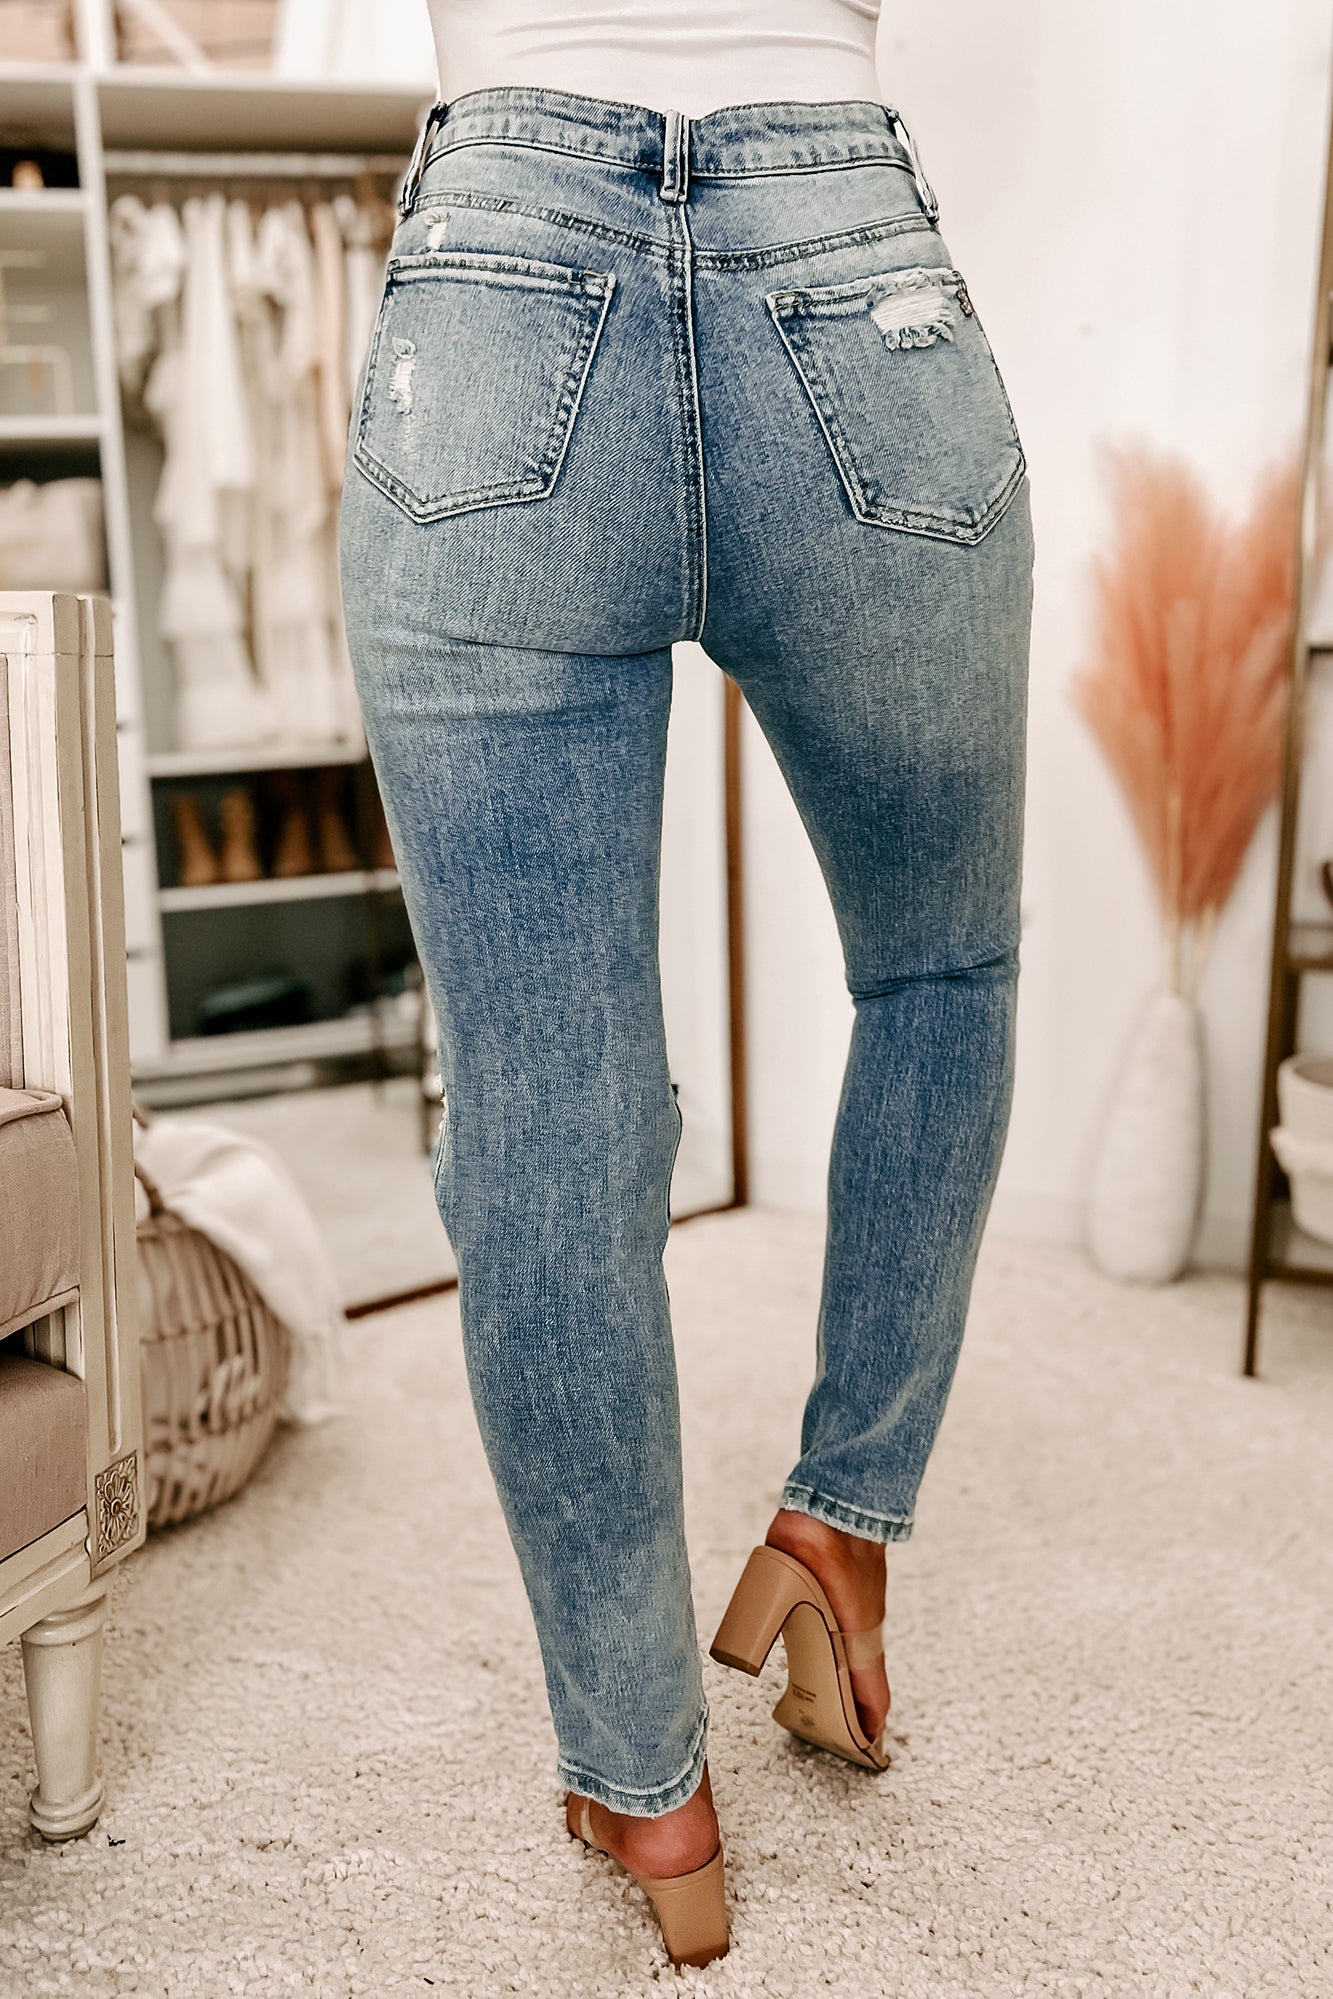 Jeans for all Occasions – 8 Awesome Styling Tips - AllDayChic